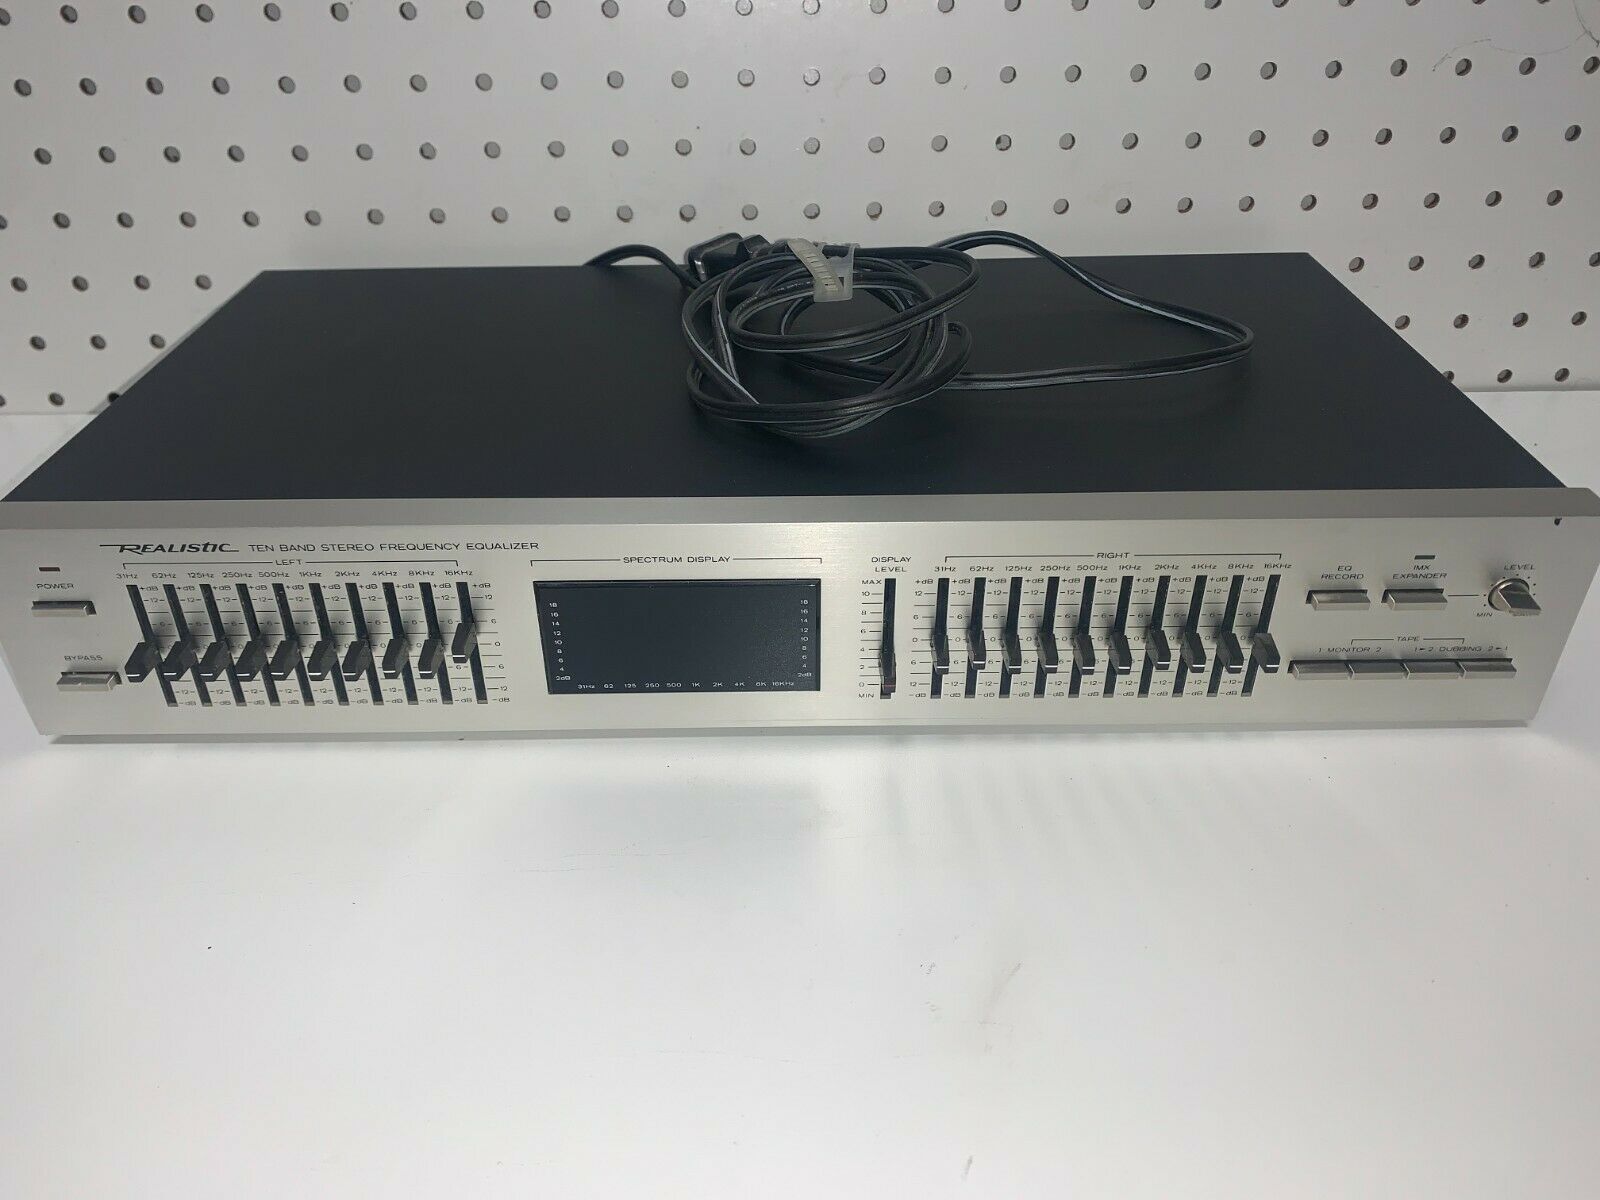 Realistic Ten Band Stereo Frequency Equalizer Model 31-2020